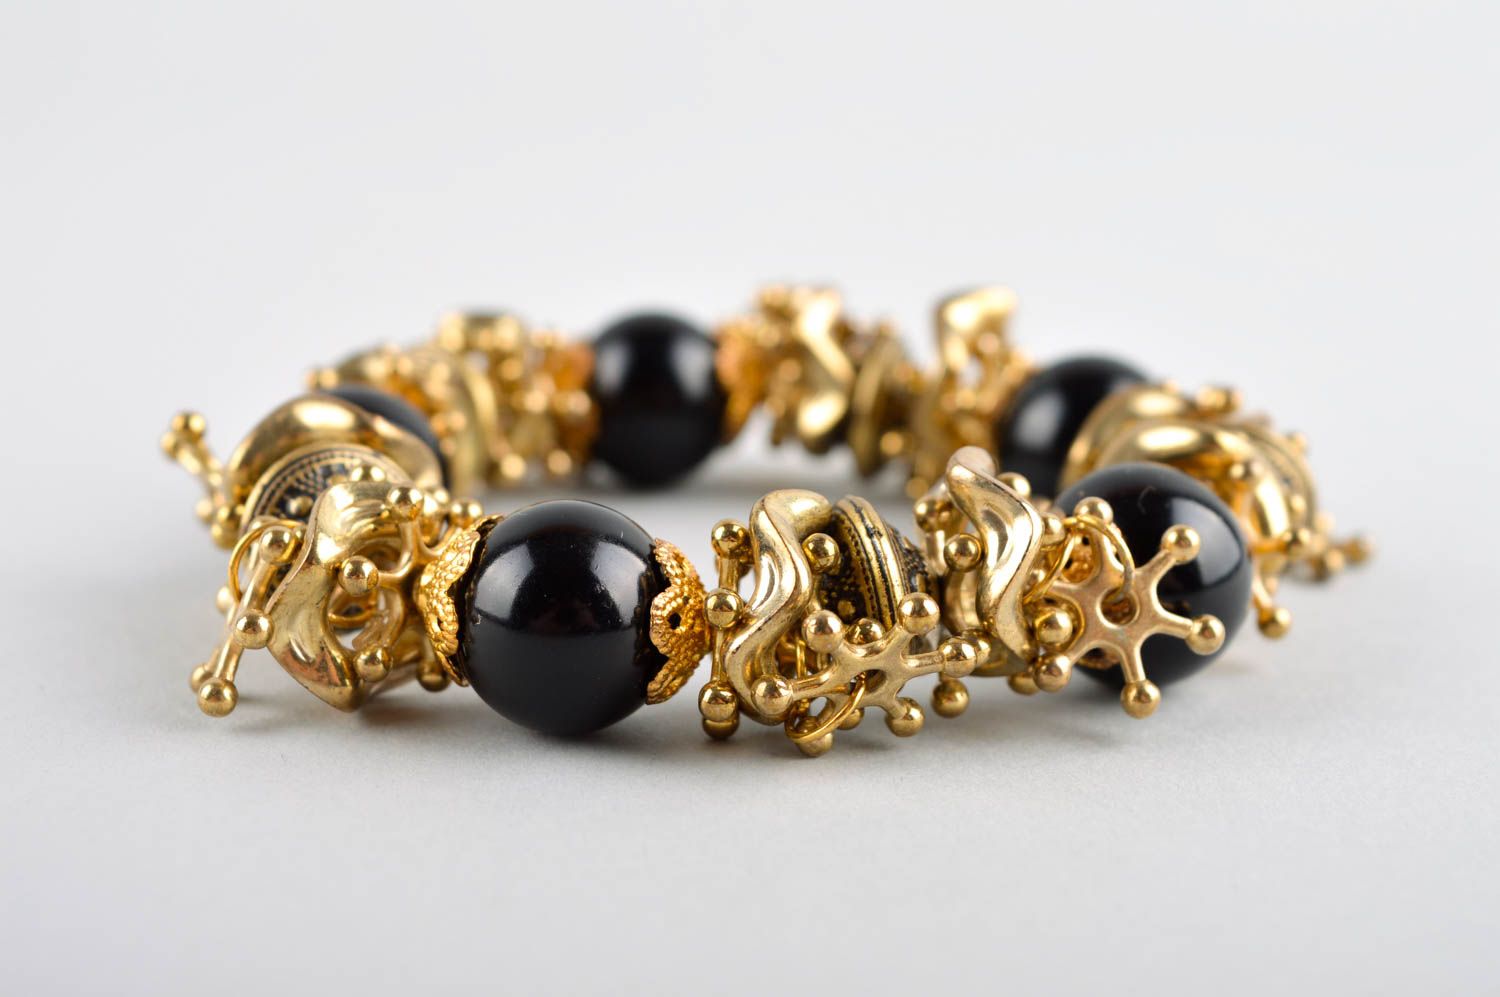 Elastic stretchy bracelet with black beads and golden color charms for teen girl photo 3